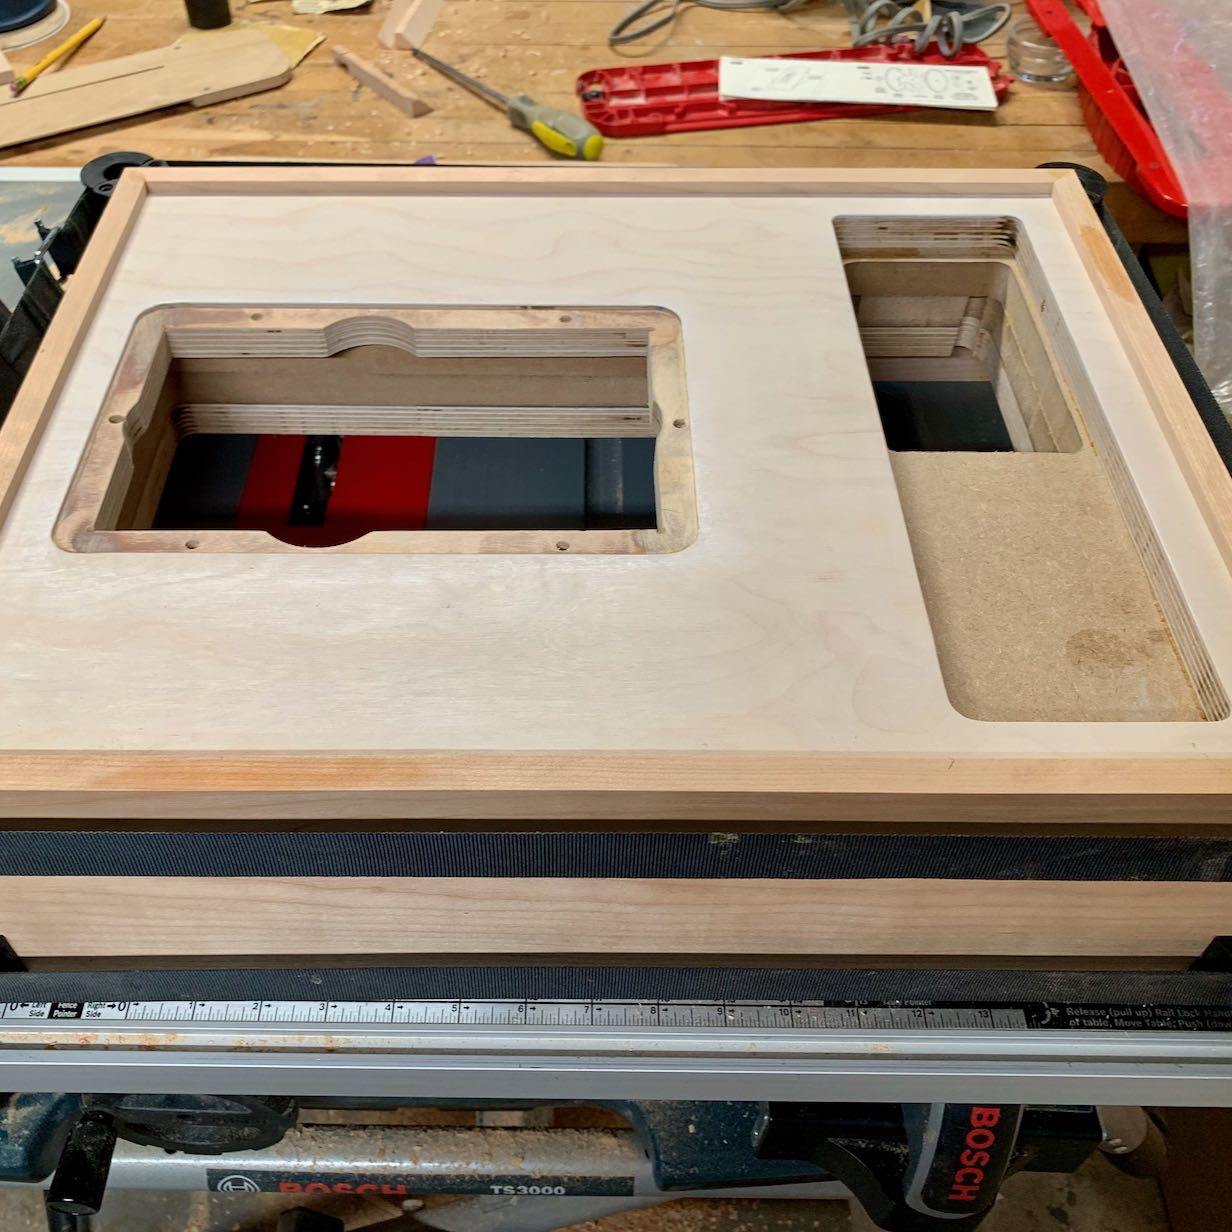 Top view of turtable base in progress, showing recesses for assembly and layered construction